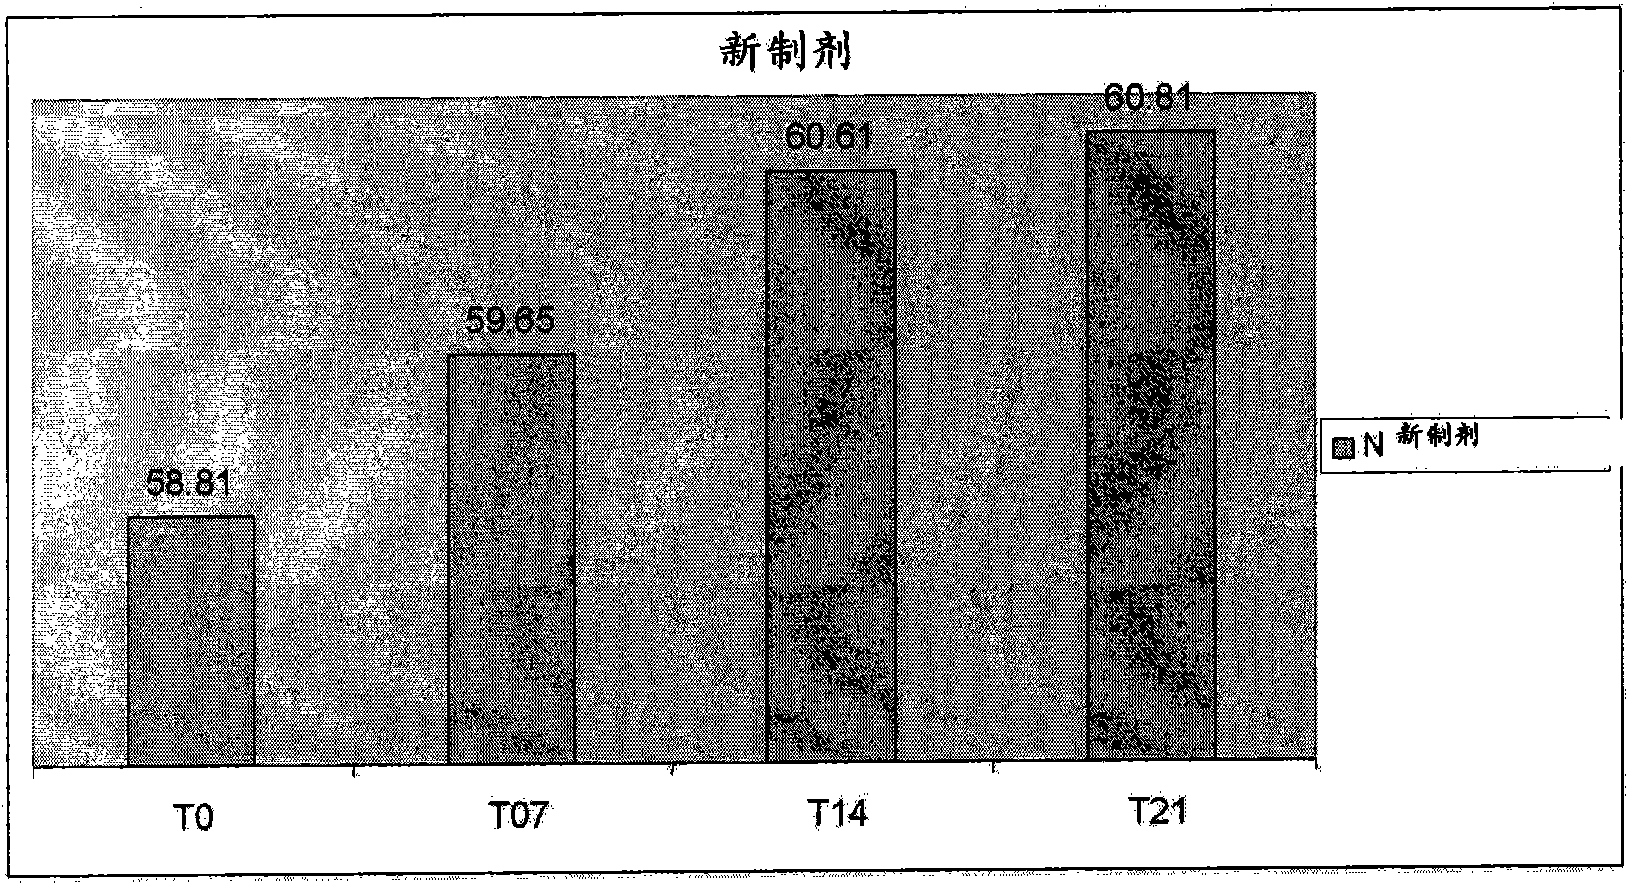 Topical cosmetic skin lightening compositions and methods of use thereof